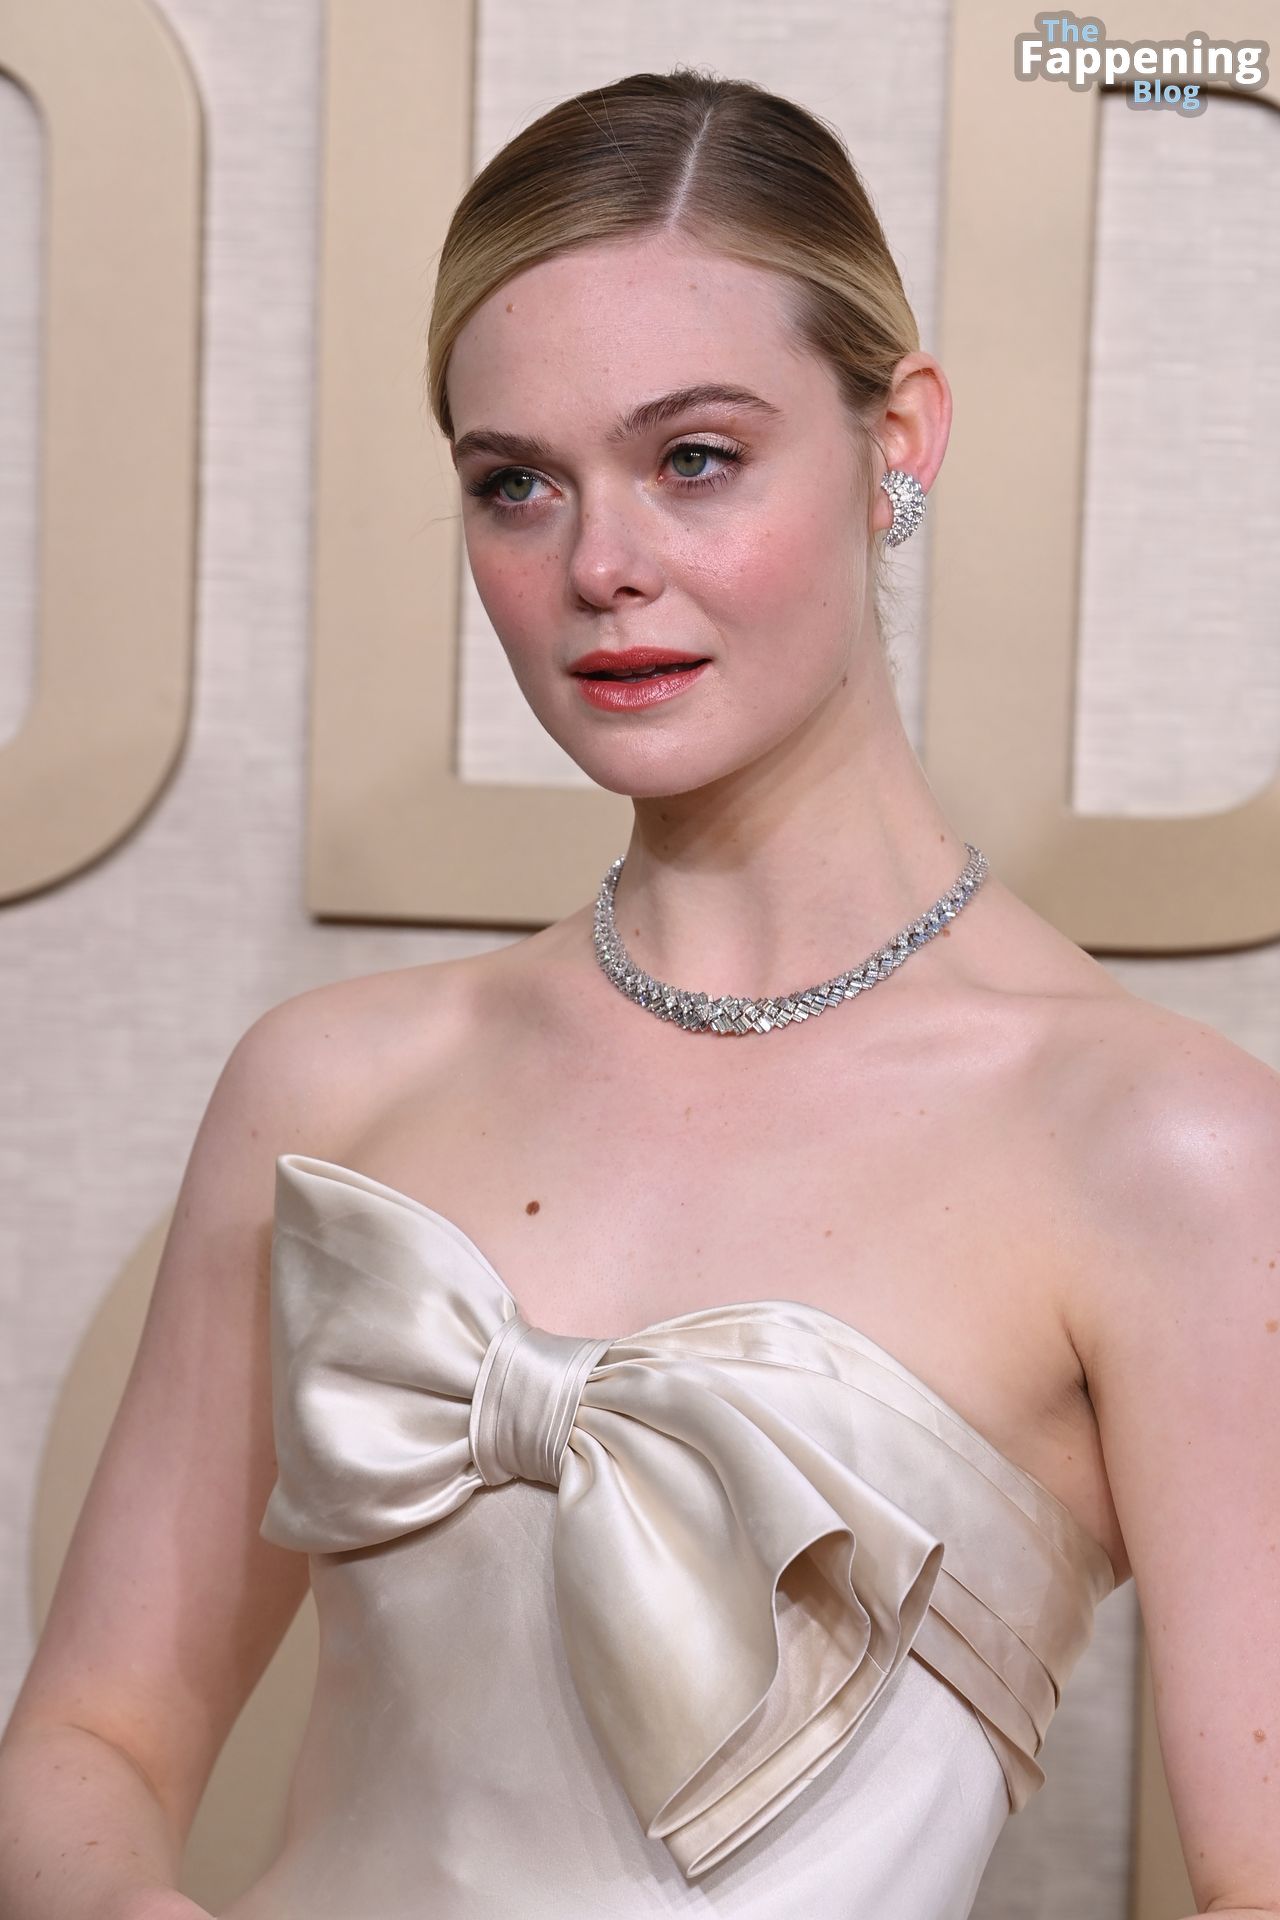 Elle-Fanning-Sexy-56-The-Fappening-Blog.jpg